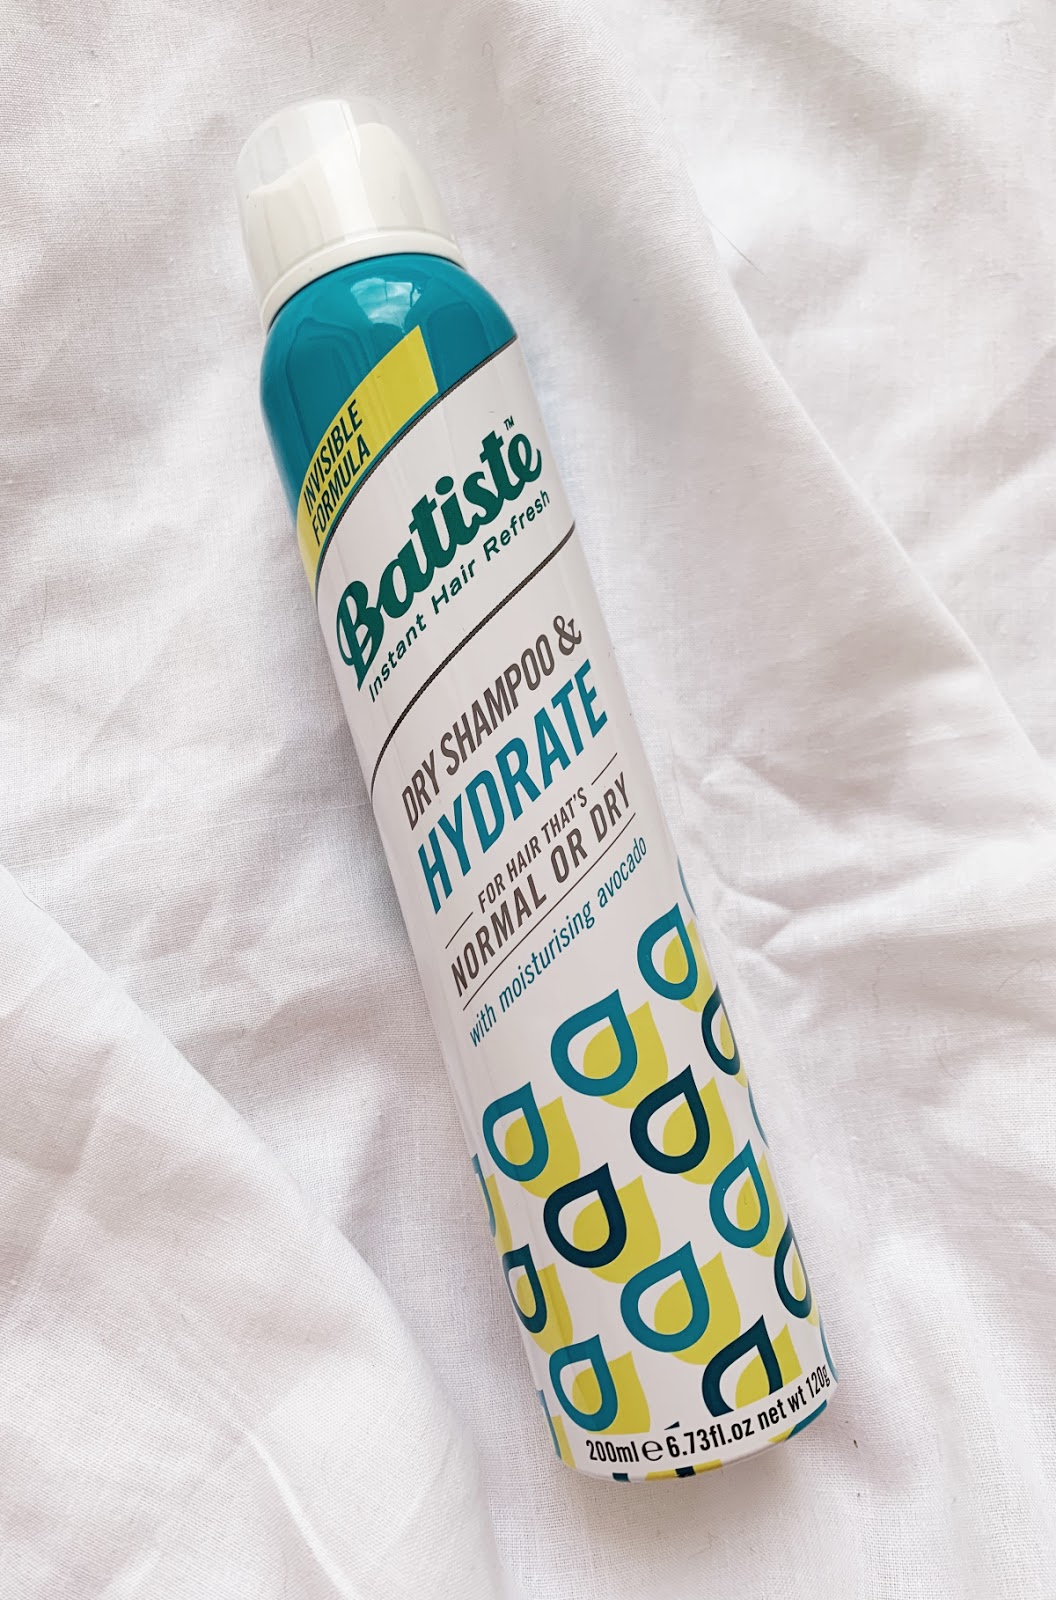 Batiste Instant Hair Refresh Dry Shampoo & Hydrate Review